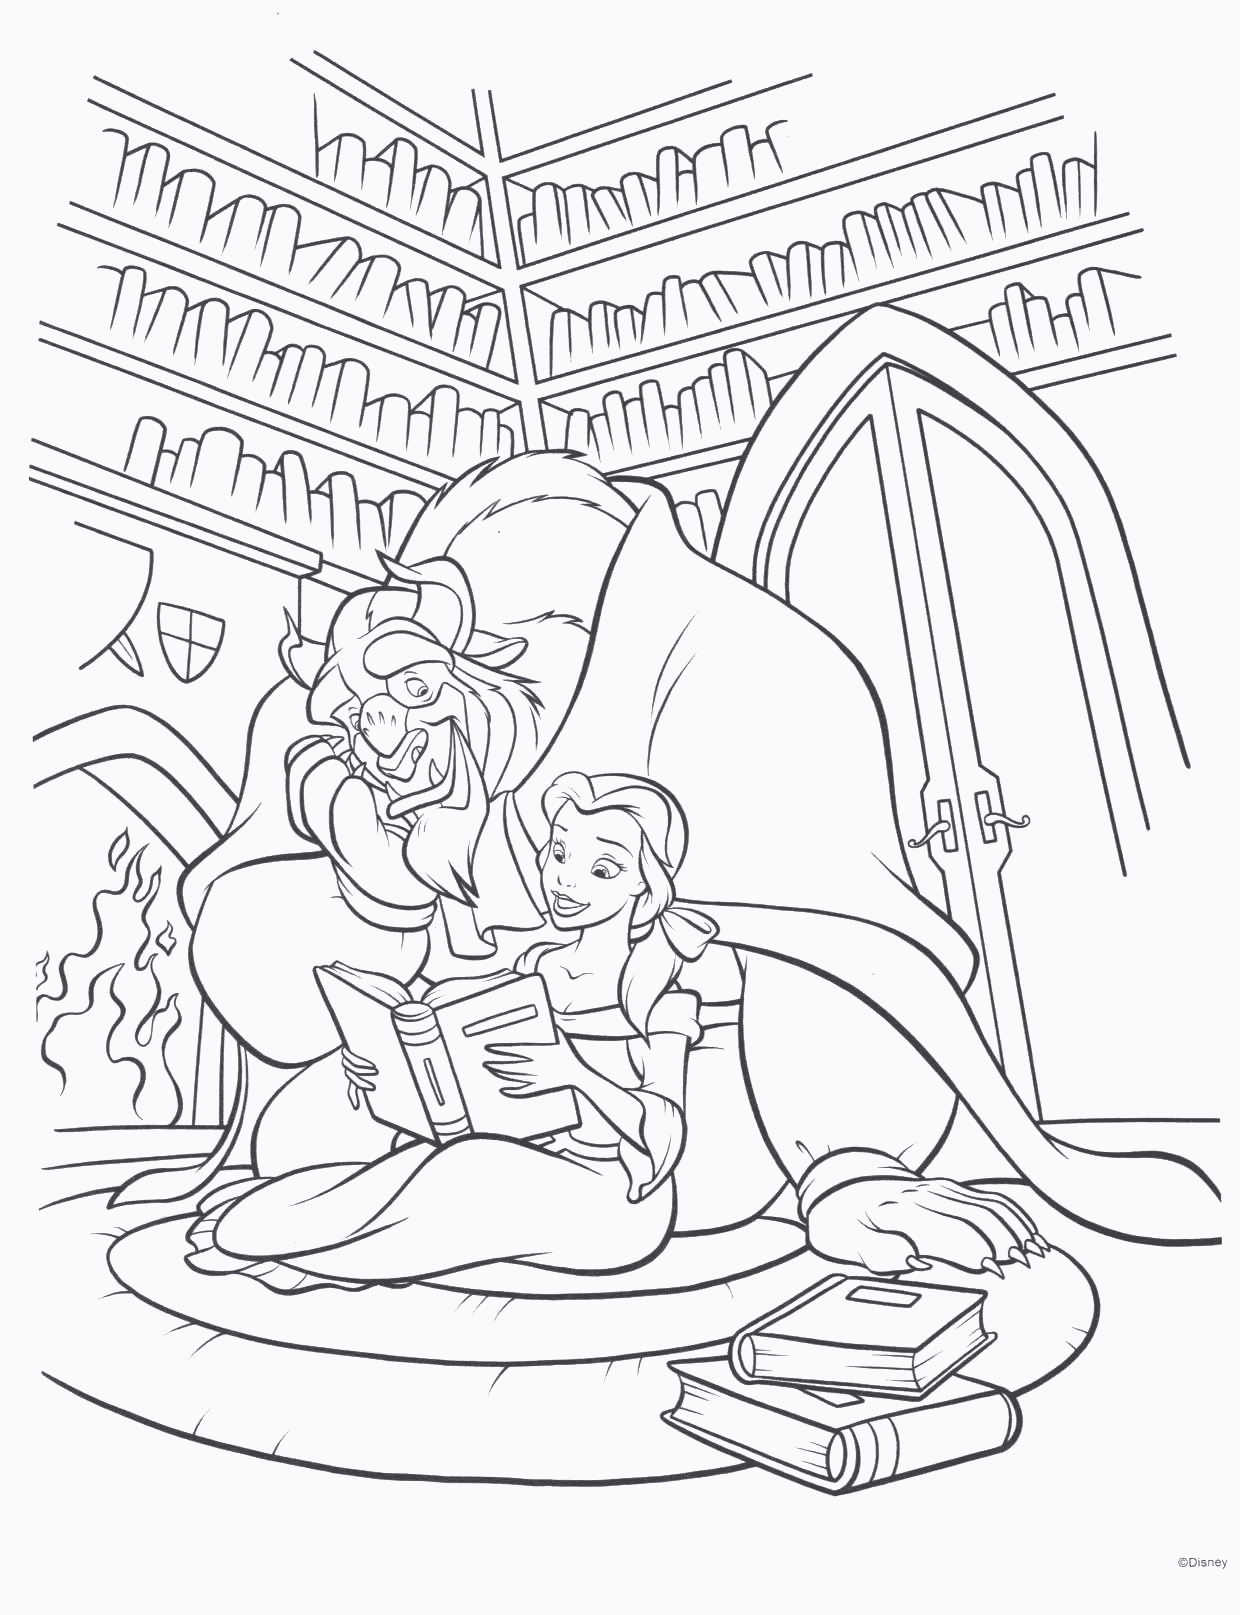 Download Beauty beast - Return to childhood Adult Coloring Pages